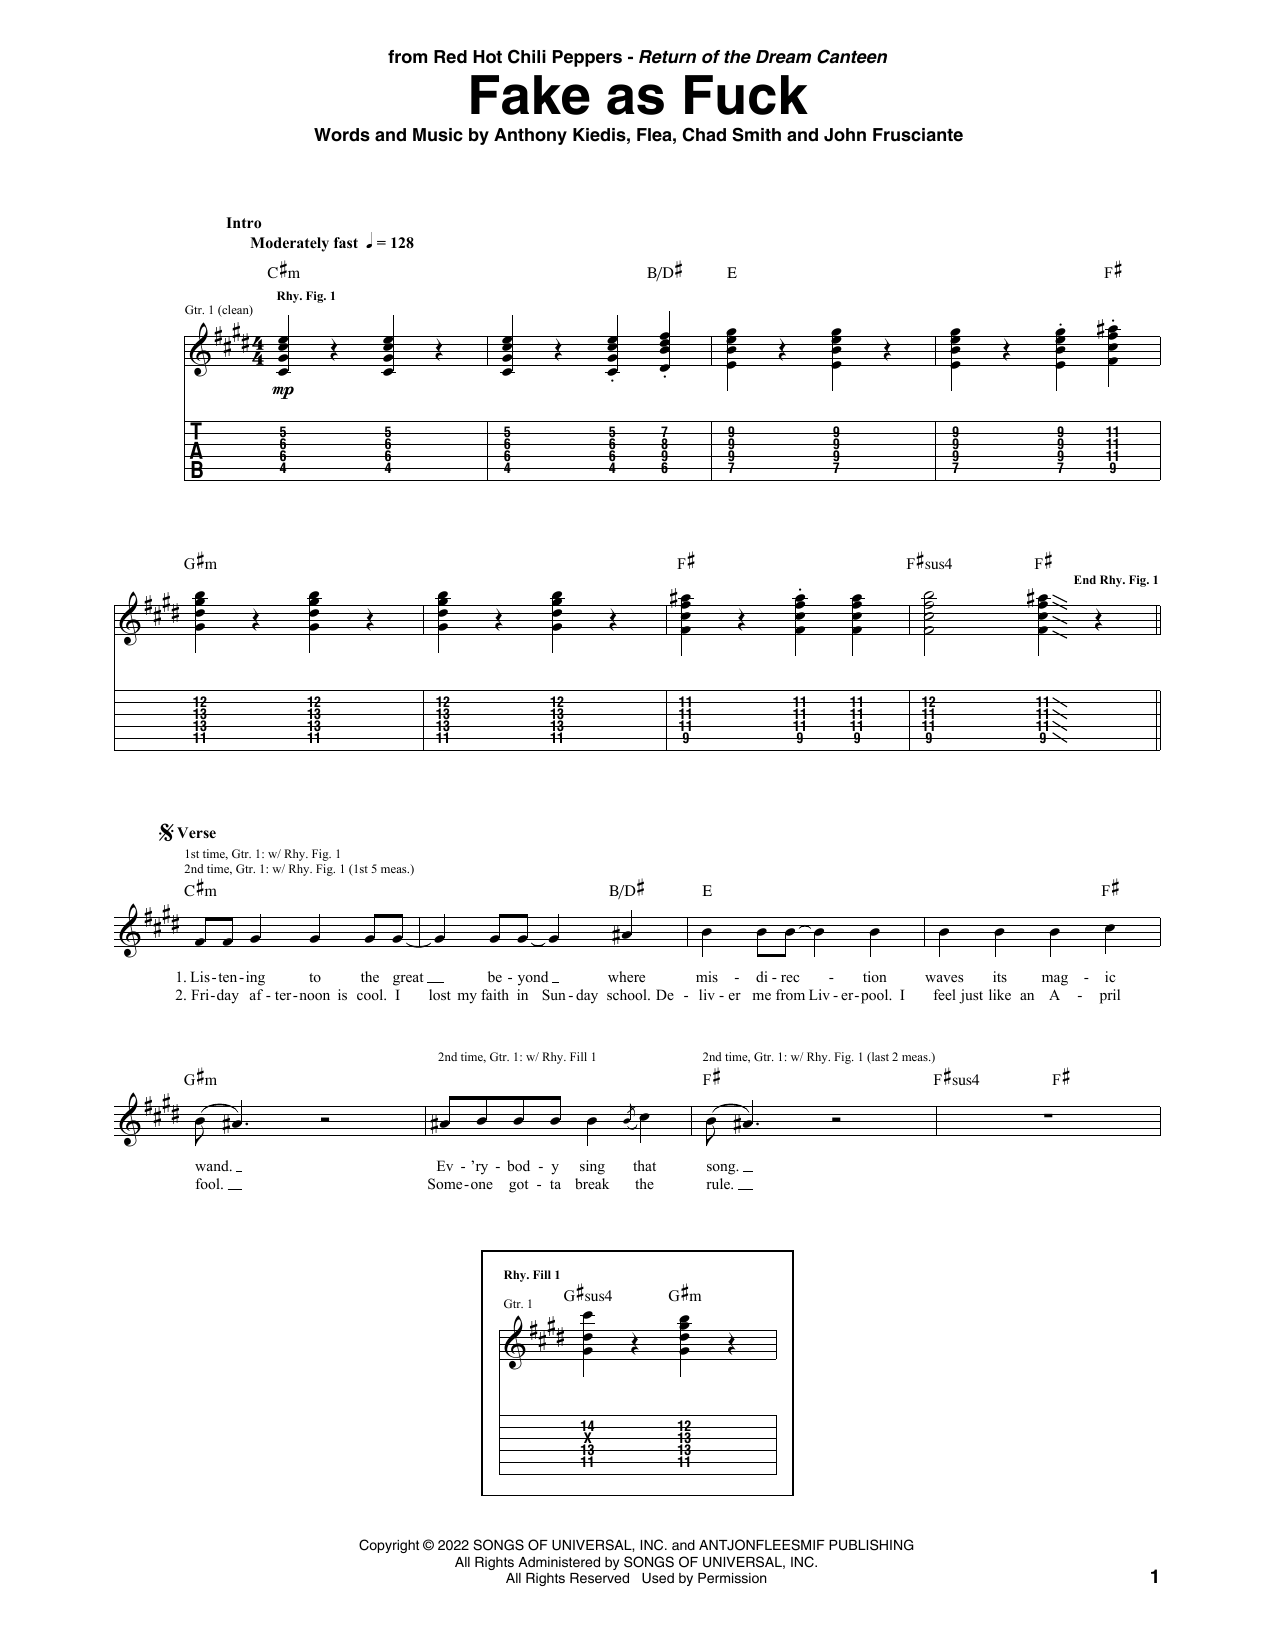 Download Red Hot Chili Peppers Fake As Fuck Sheet Music